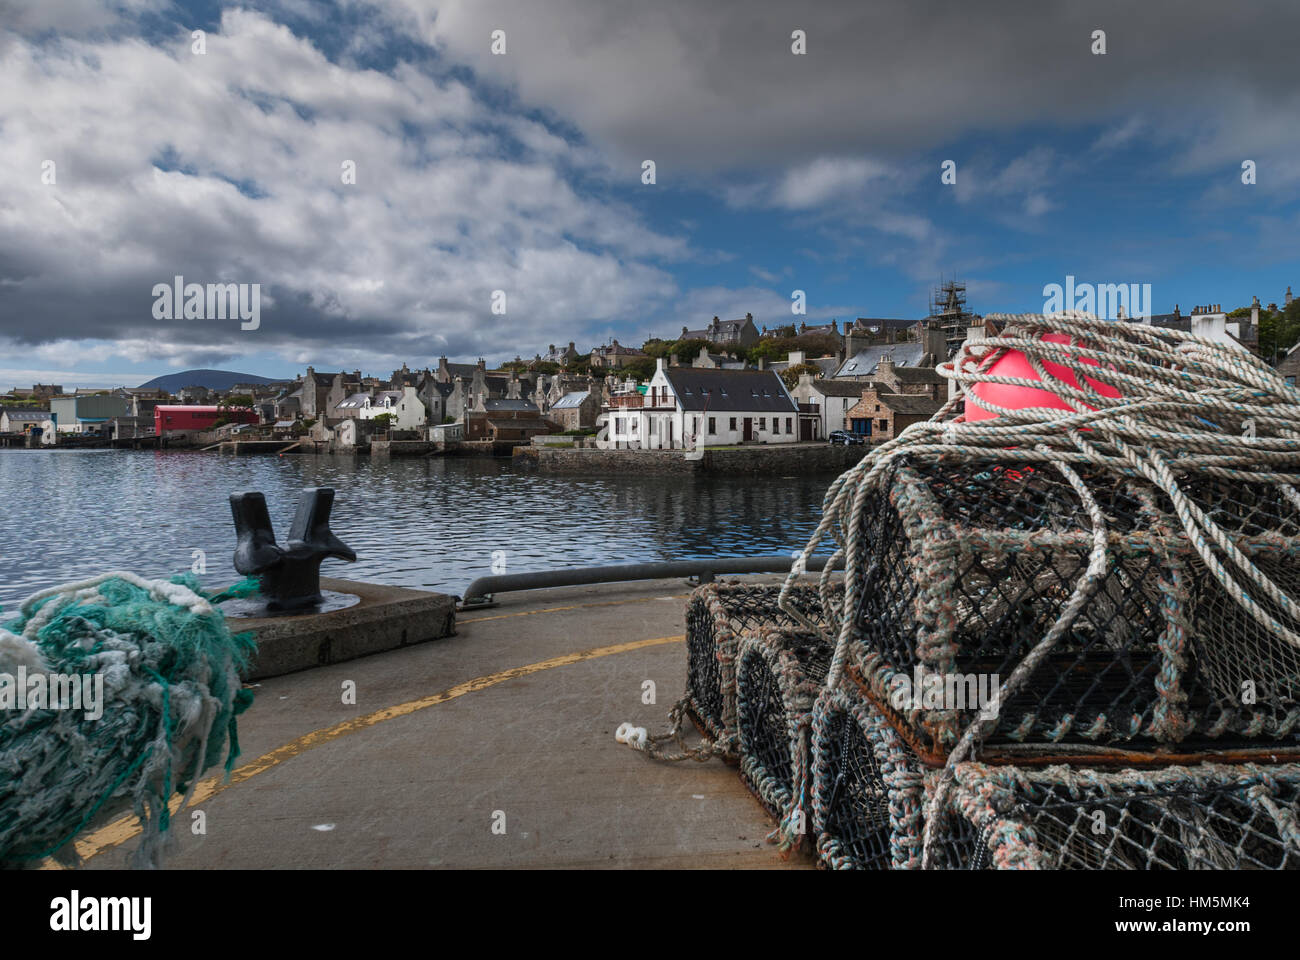 Downtown Stromness seen from the docks. Stock Photo